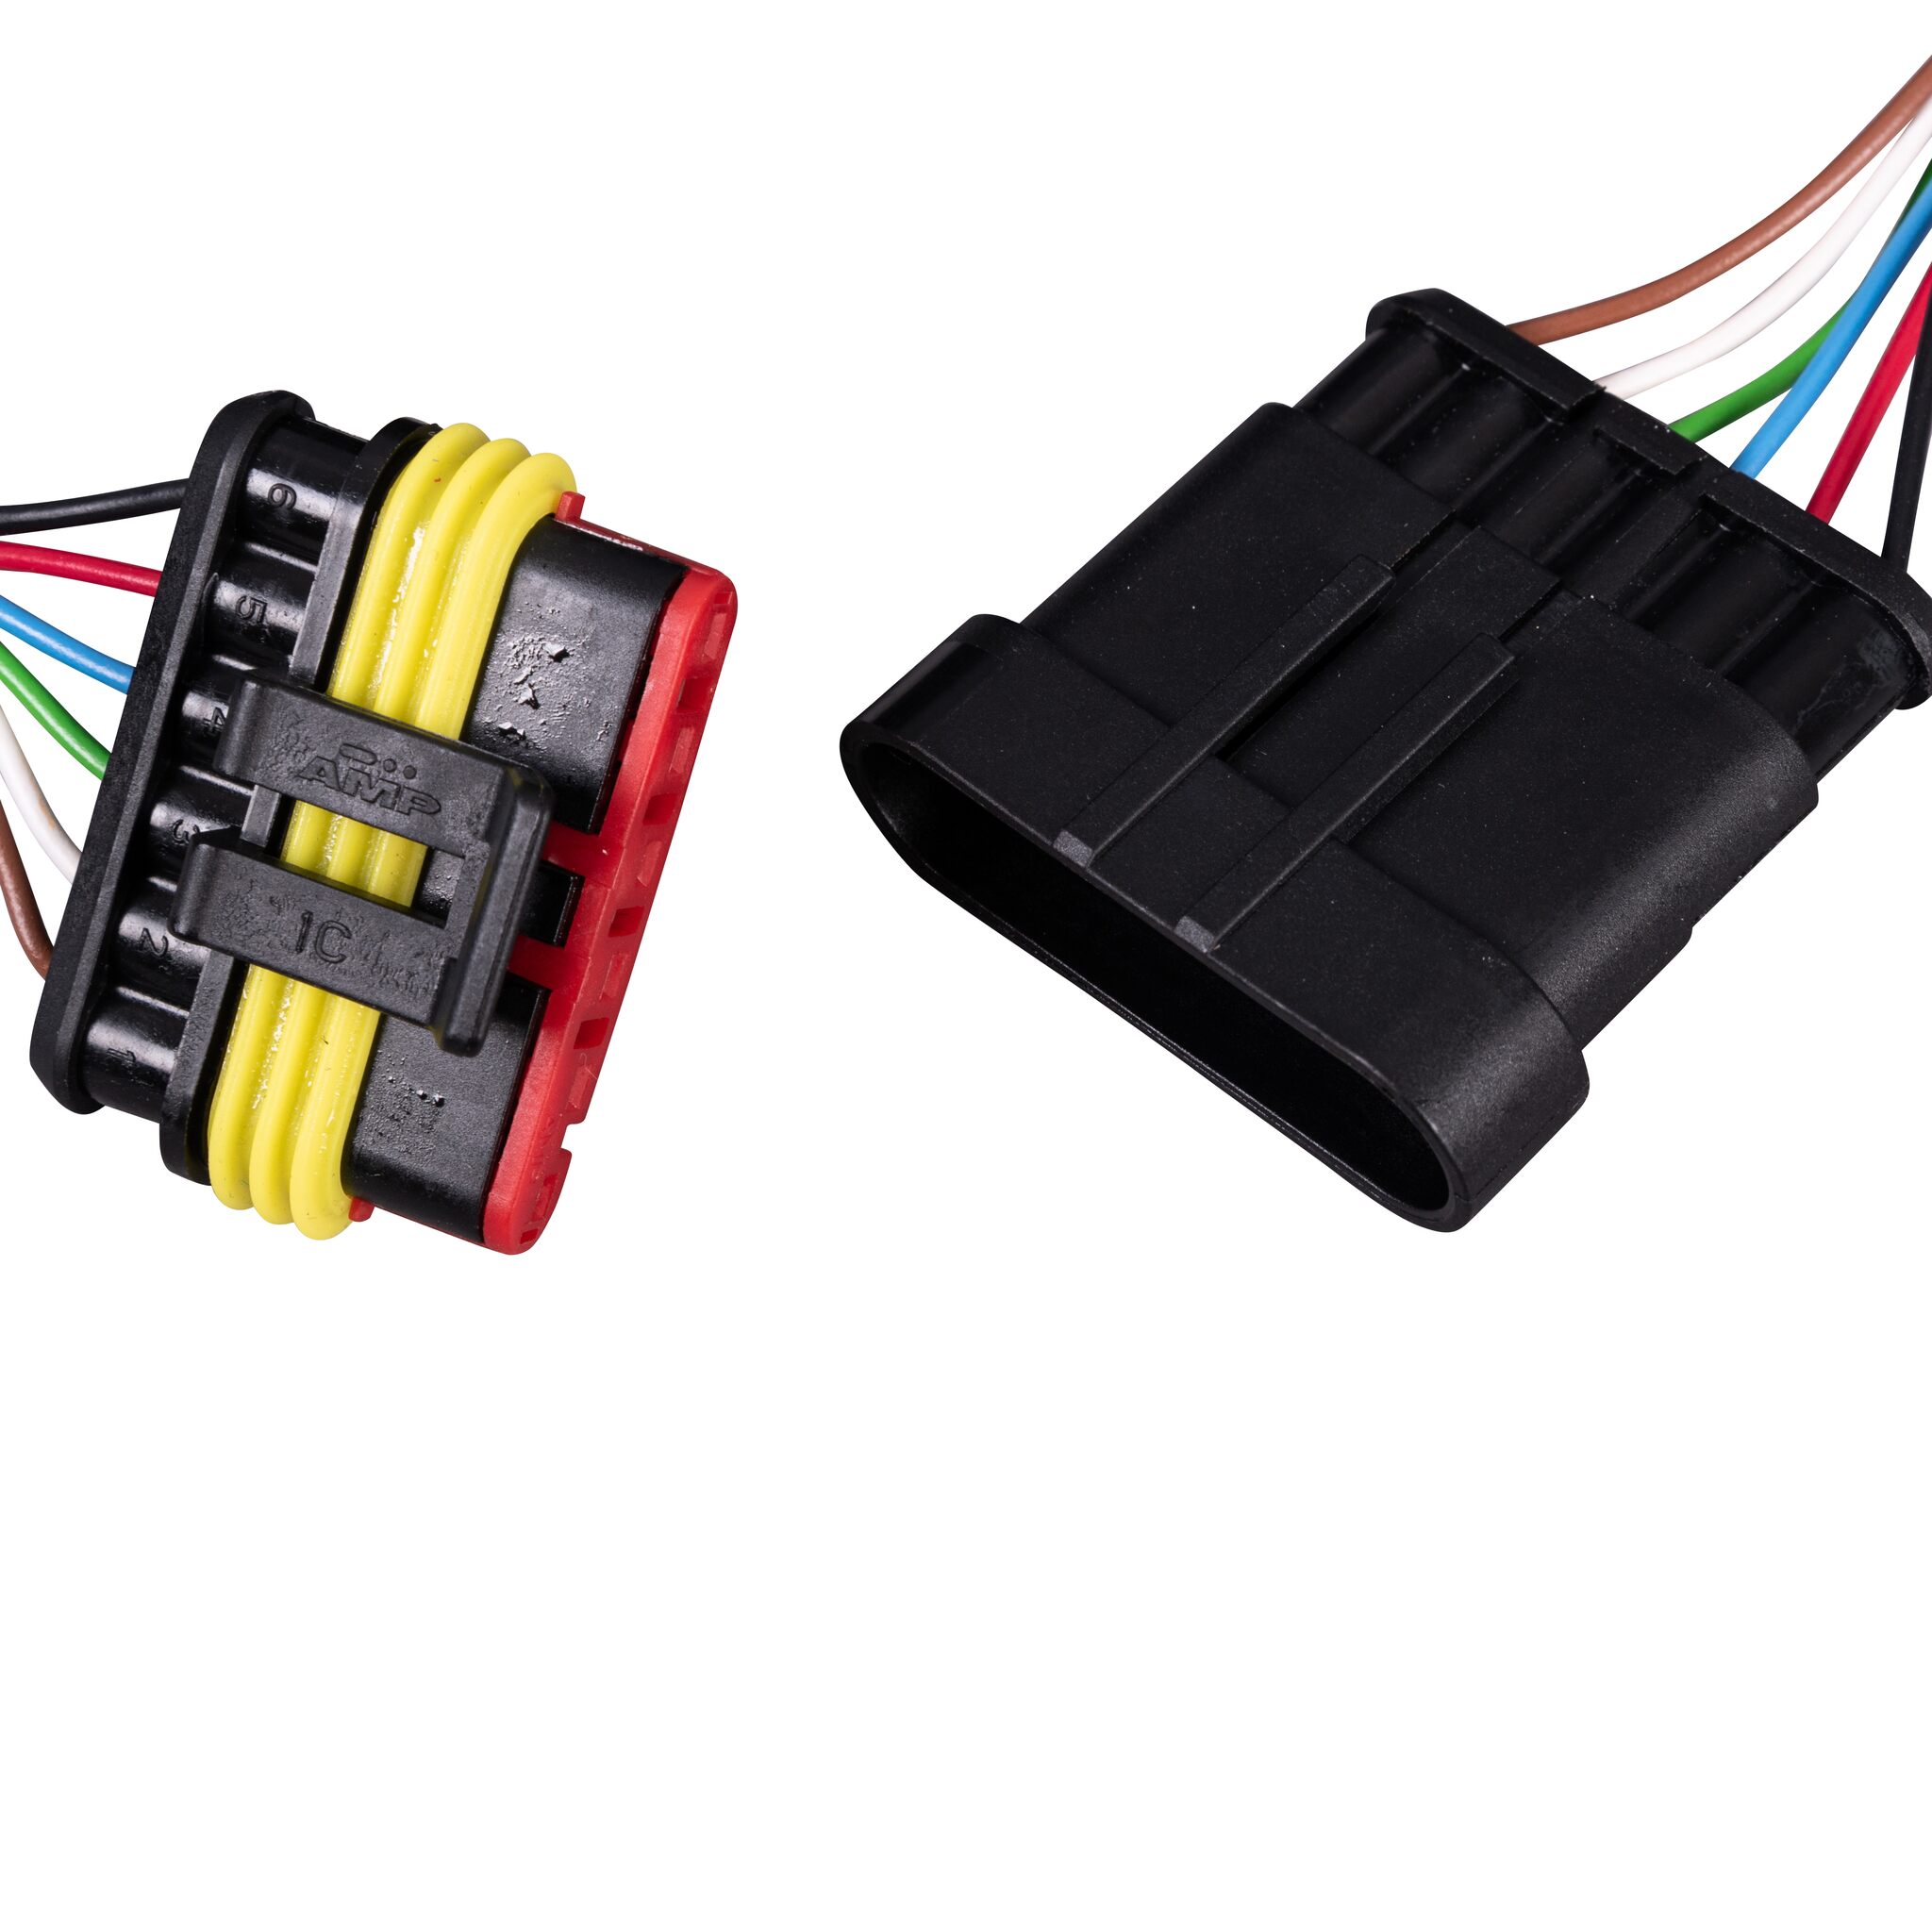 Extension cable for PU 5 control panel